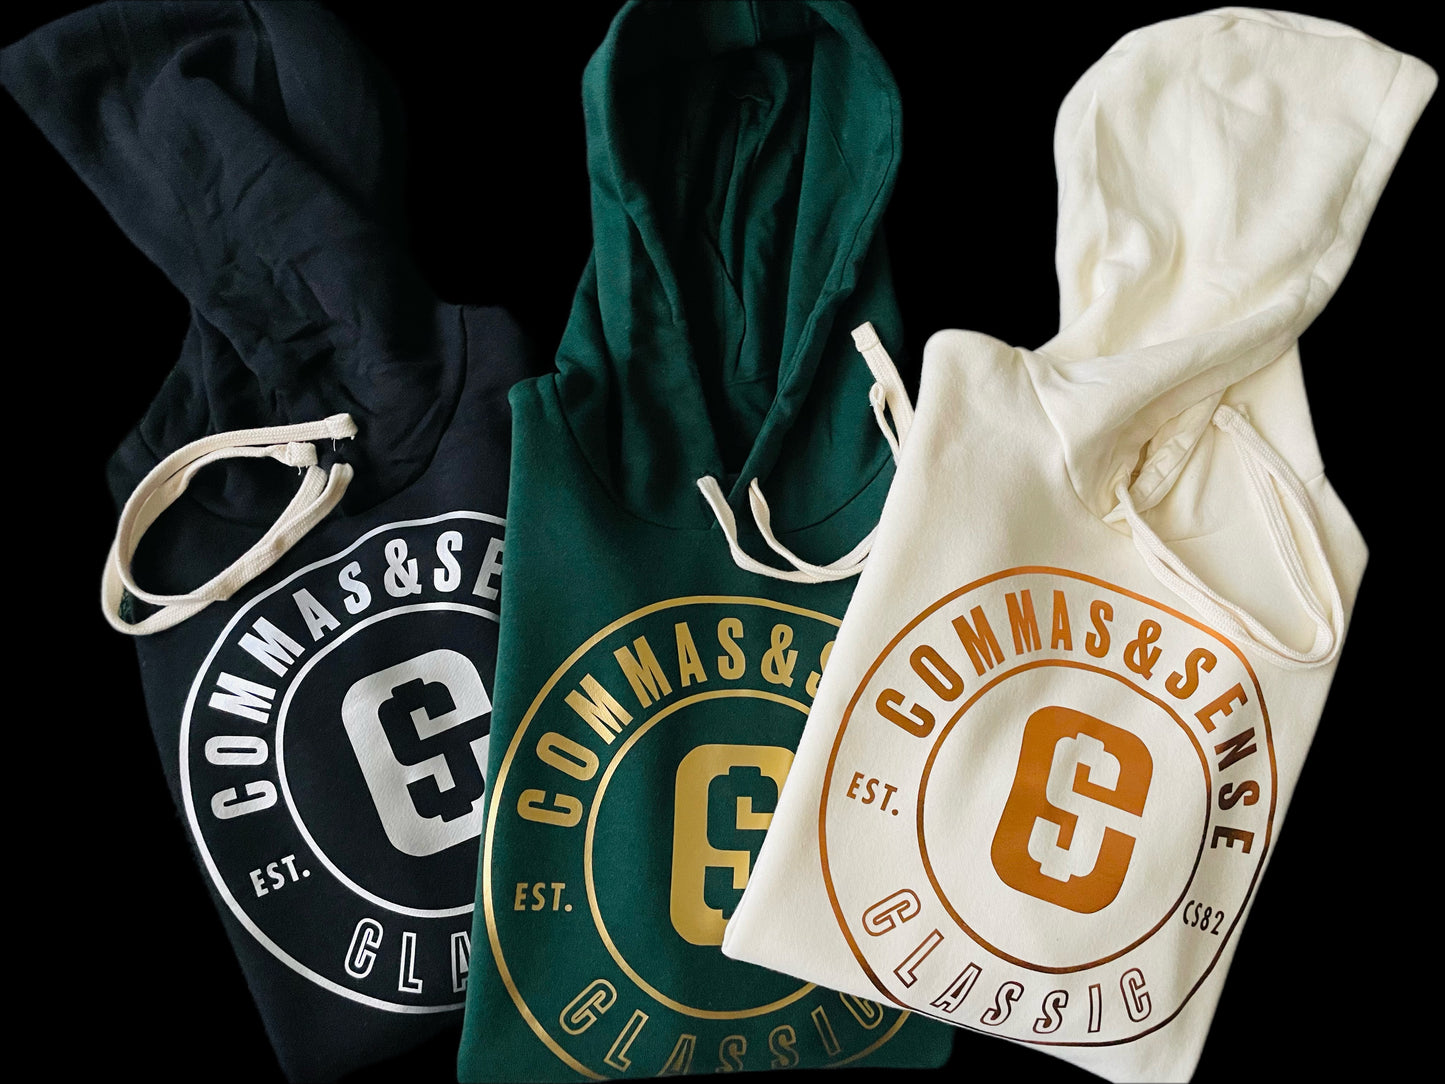 COMMAS & SENSE CURRENCY HOODIES - 'THE COIN COLLECTION'